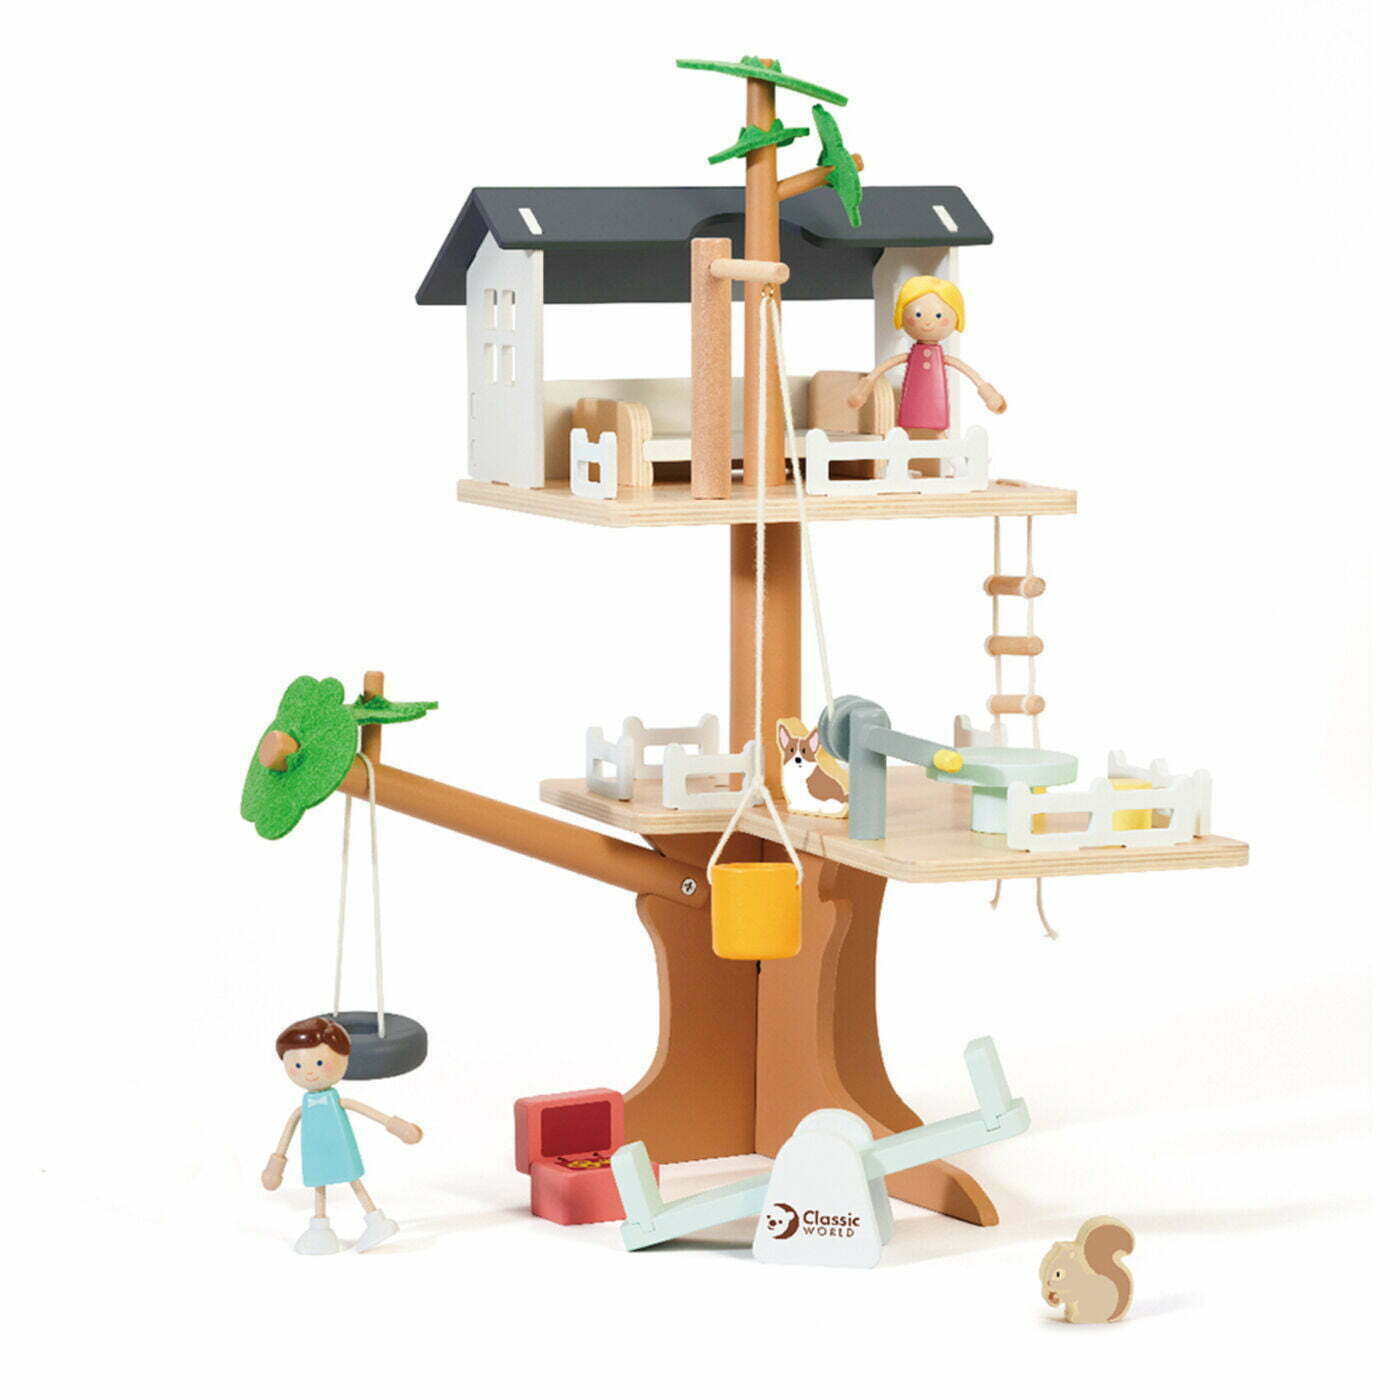 classic world tree house with two floors, 2 figurines, as dog and a squirrel